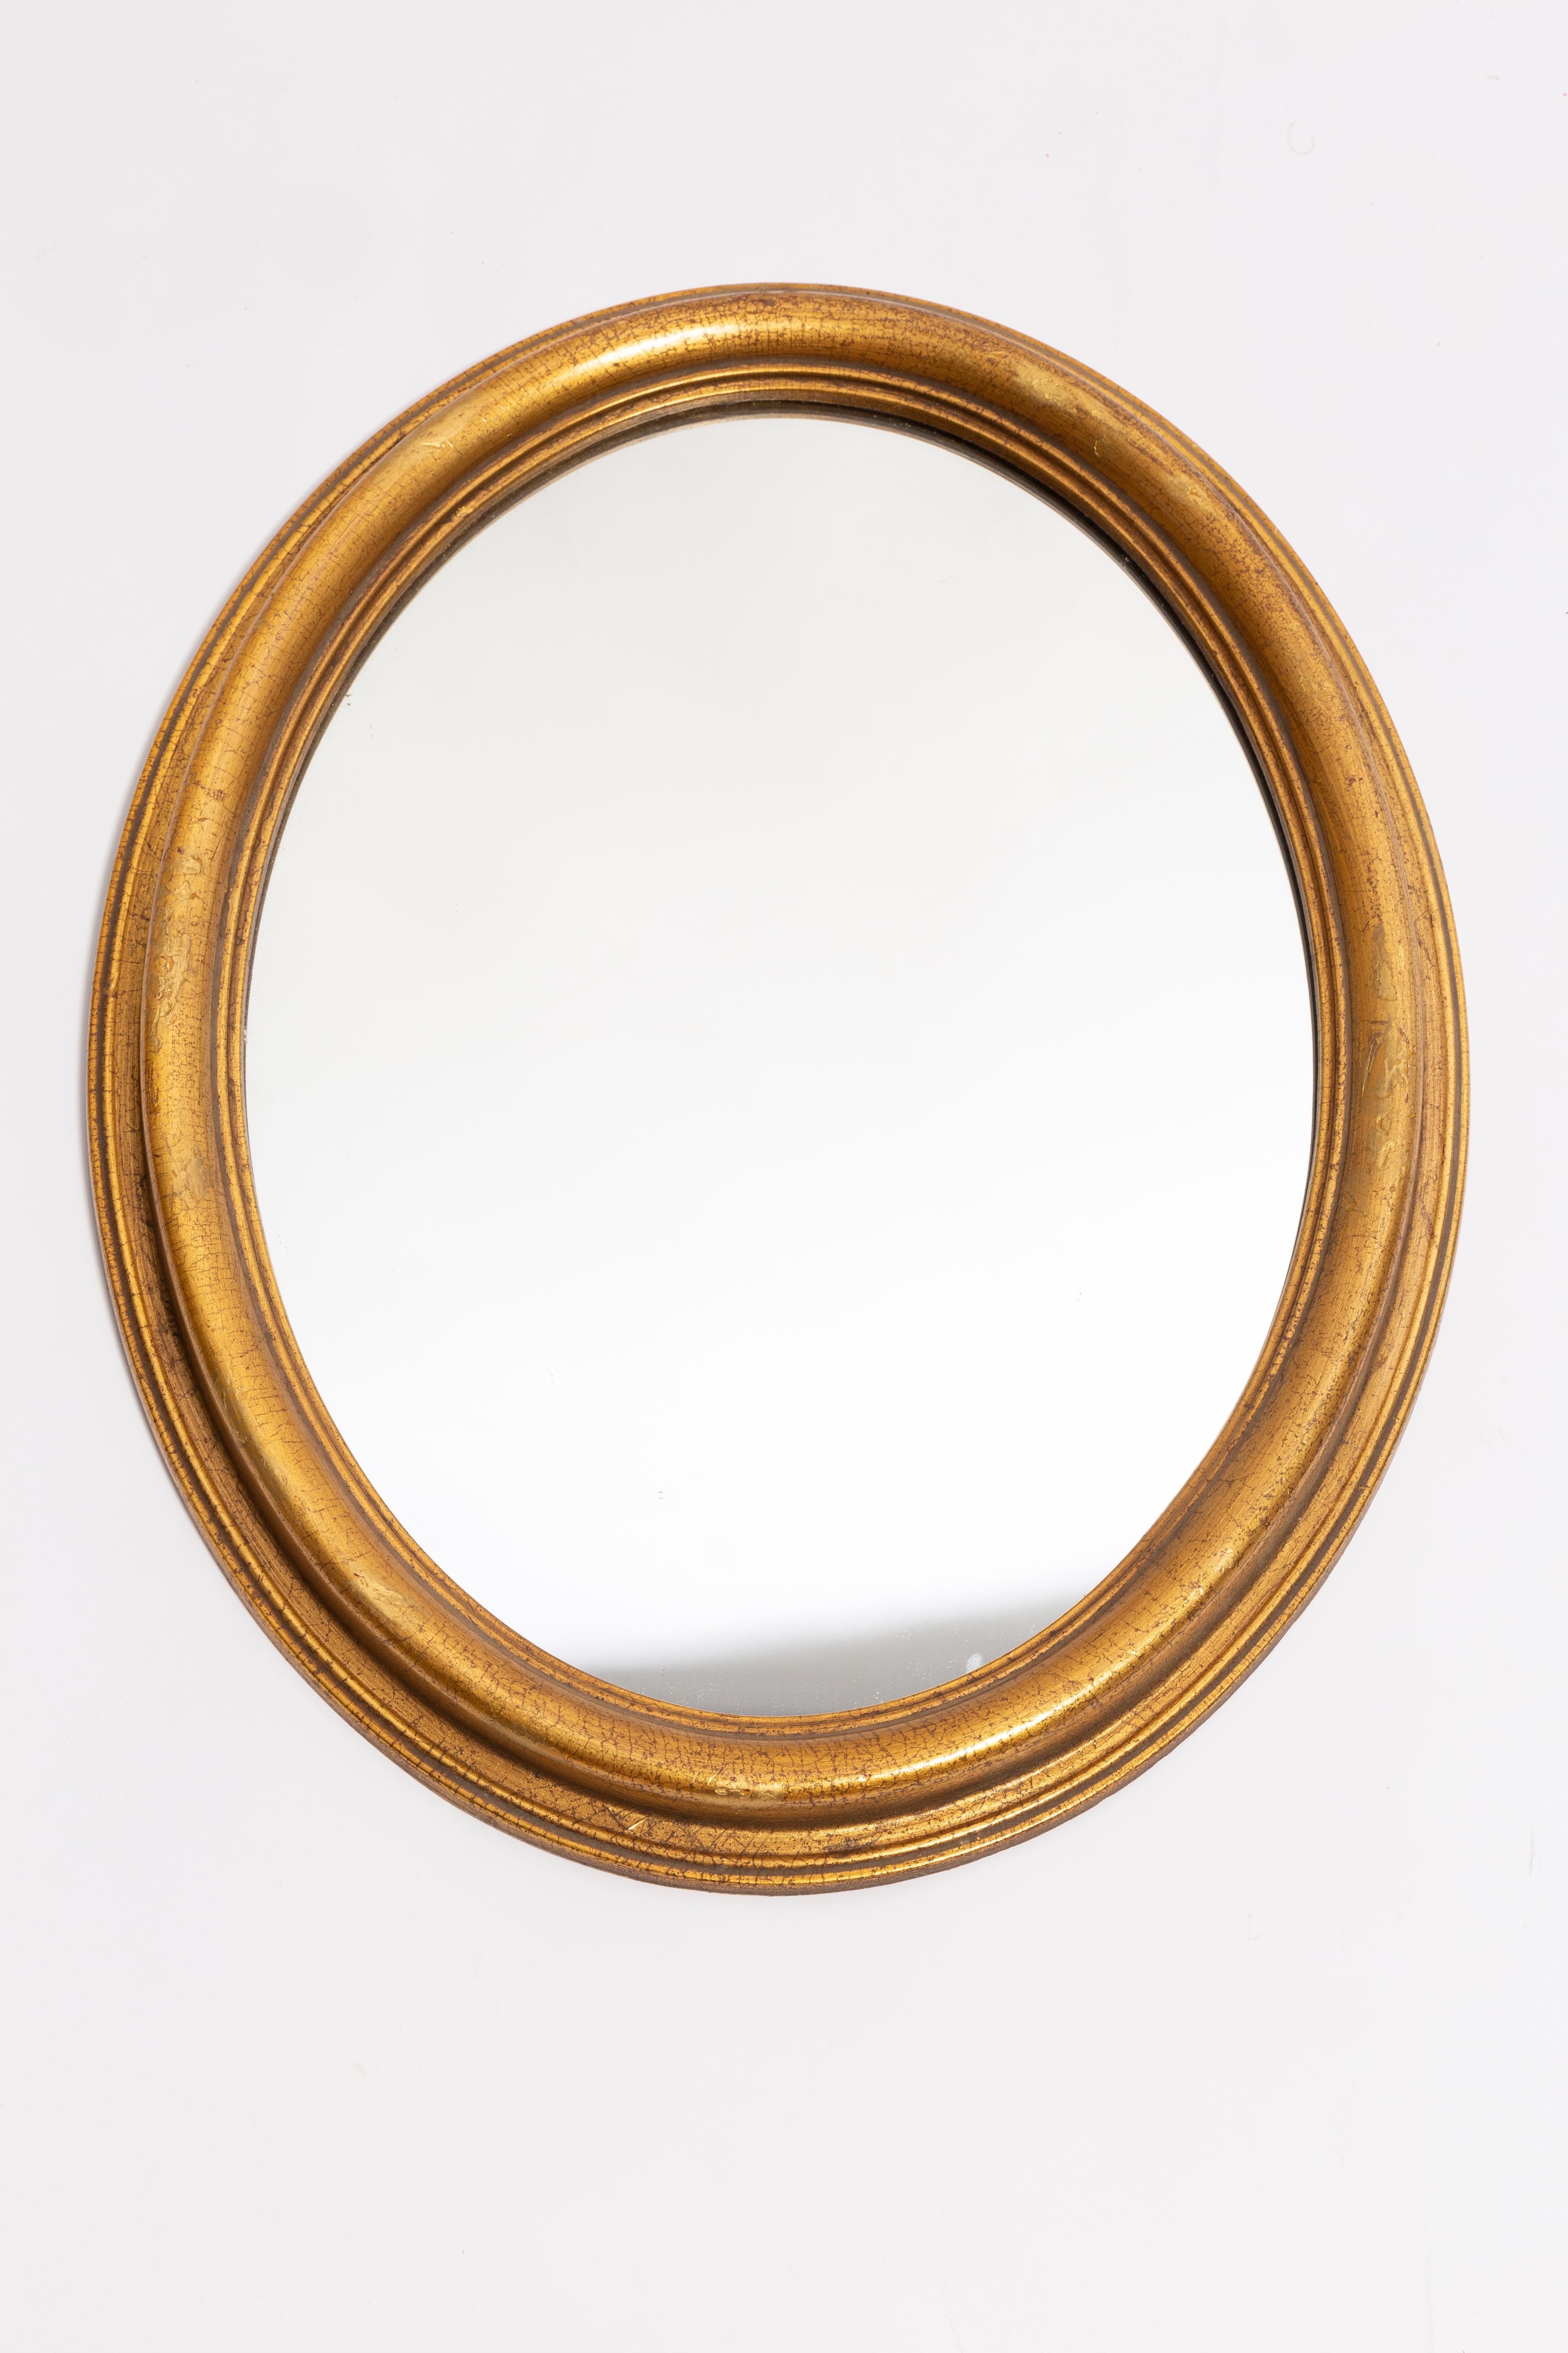 A beautiful big oval mirror in a golden decorative frame from Italy. The frame is made of wood. Mirror is in very good vintage condition - no damage or cracks in the frame. Original glass. Really unique piece for every interior! Only one piece is